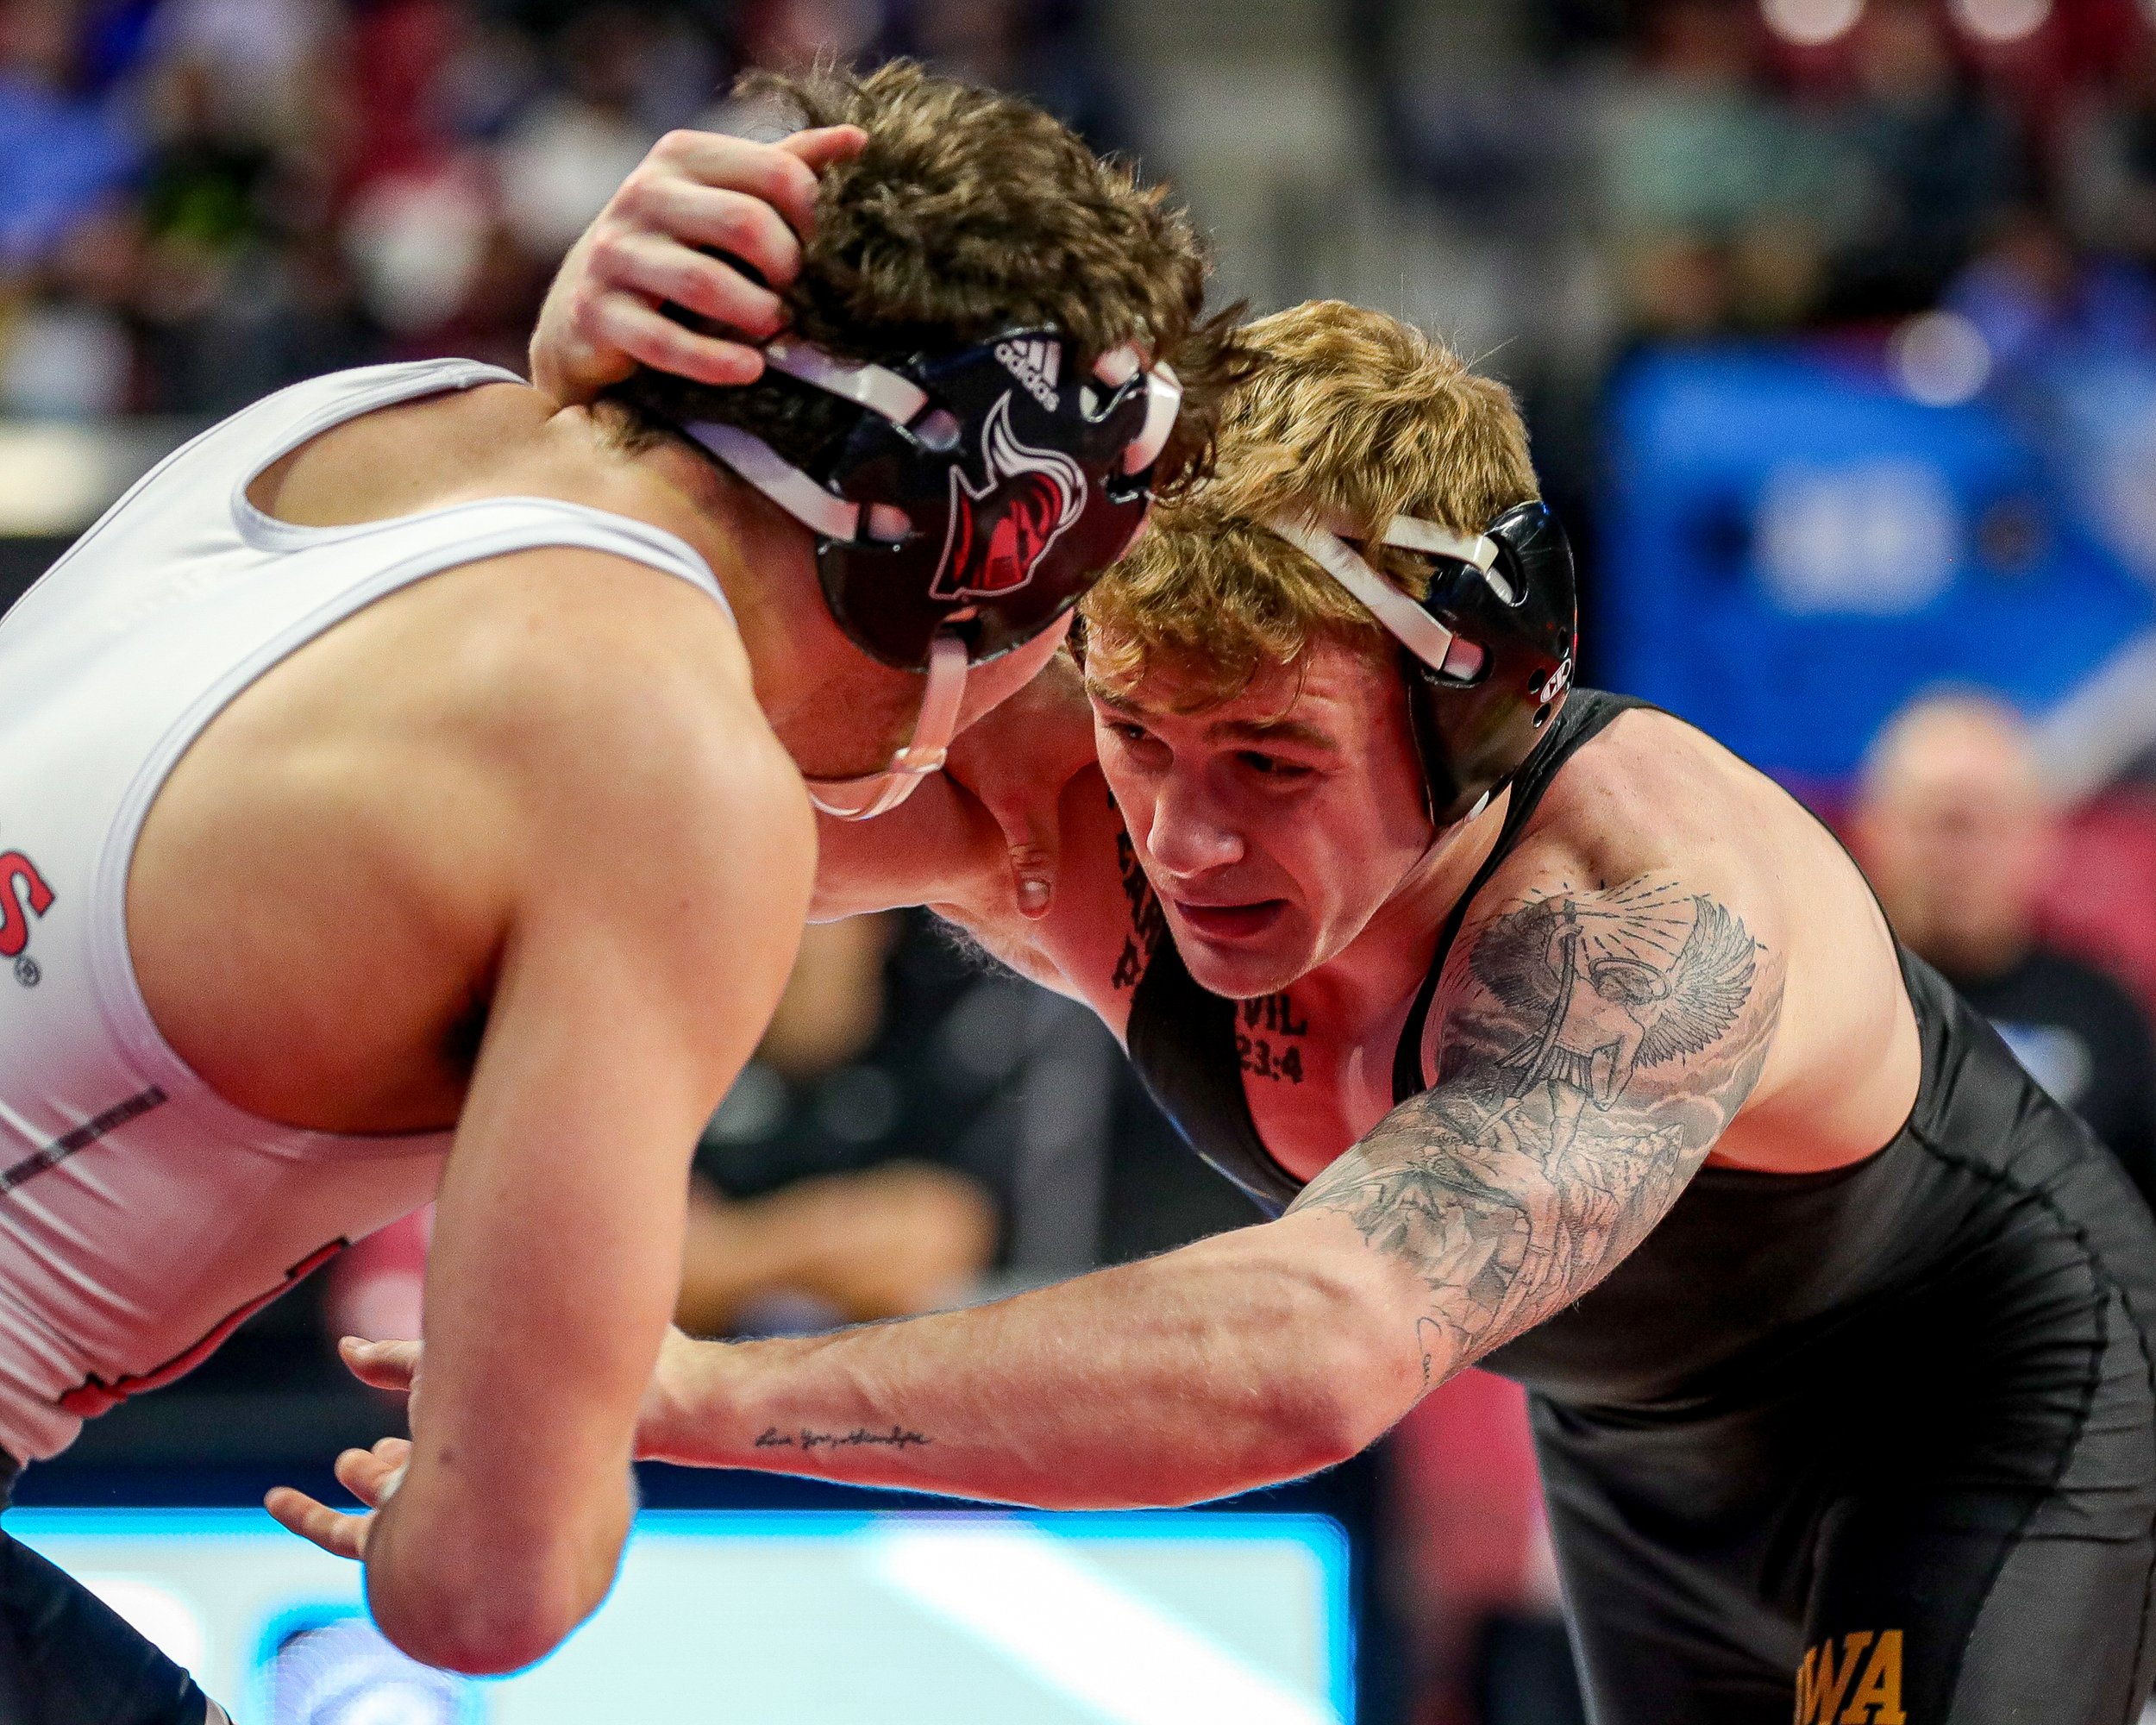  Iowa wrestler Brody Teske grapples with Rutgers’ Dylan Shawver in a 133-lb semifinal match during the Big Ten Wrestling Championships at the Xfinity Center in College Park, Maryland on Saturday, March 9, 2023. Teske lost 12-6. (David Harmantas/For t